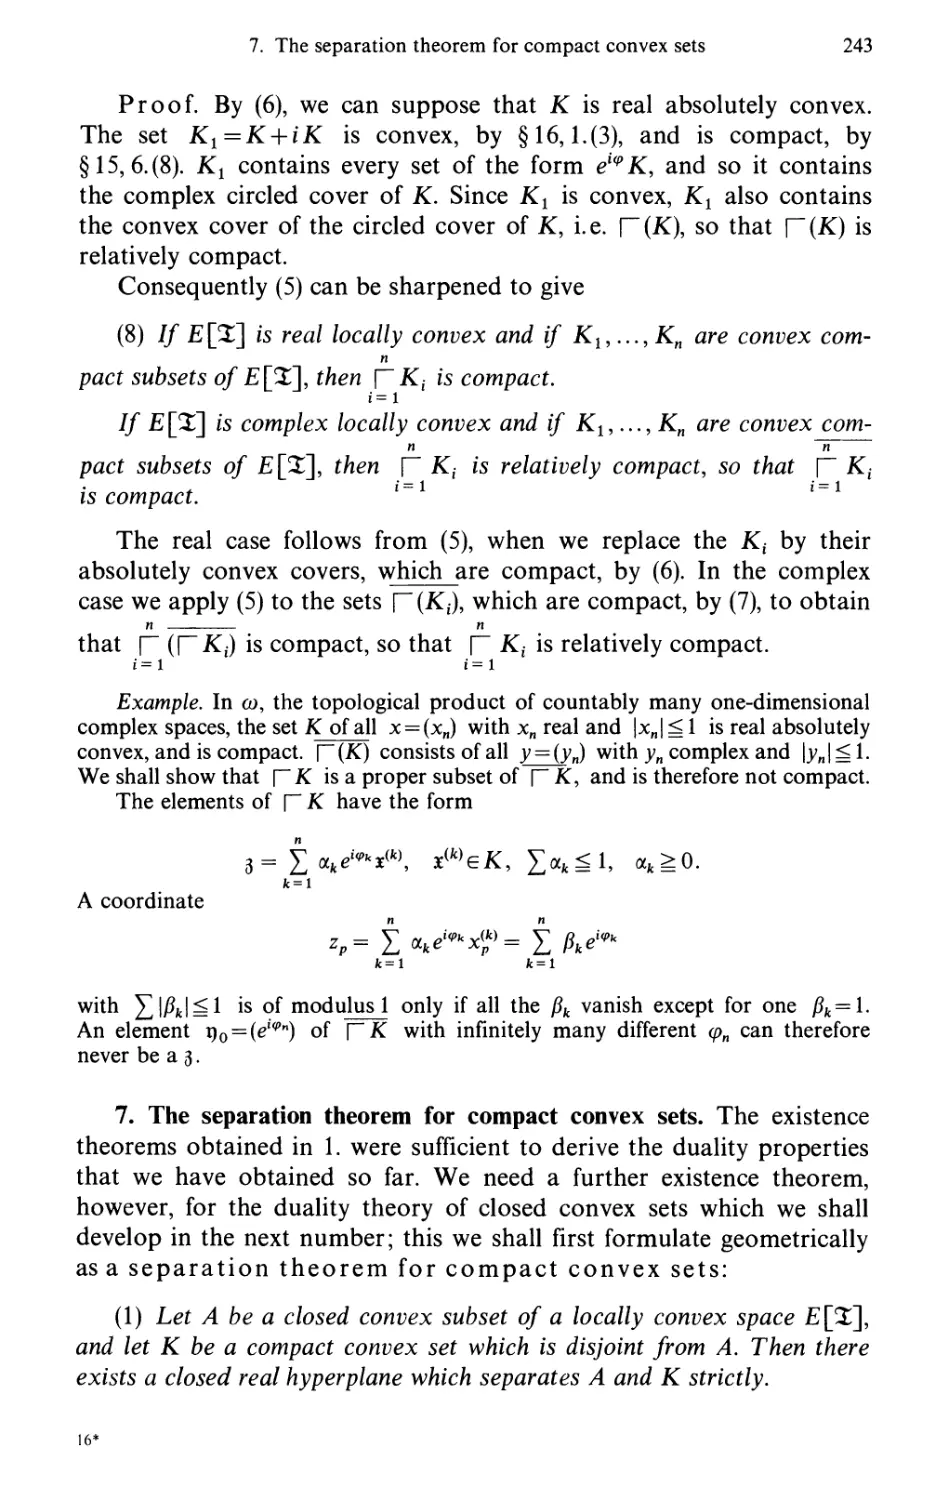 7. The separation theorem for compact convex sets